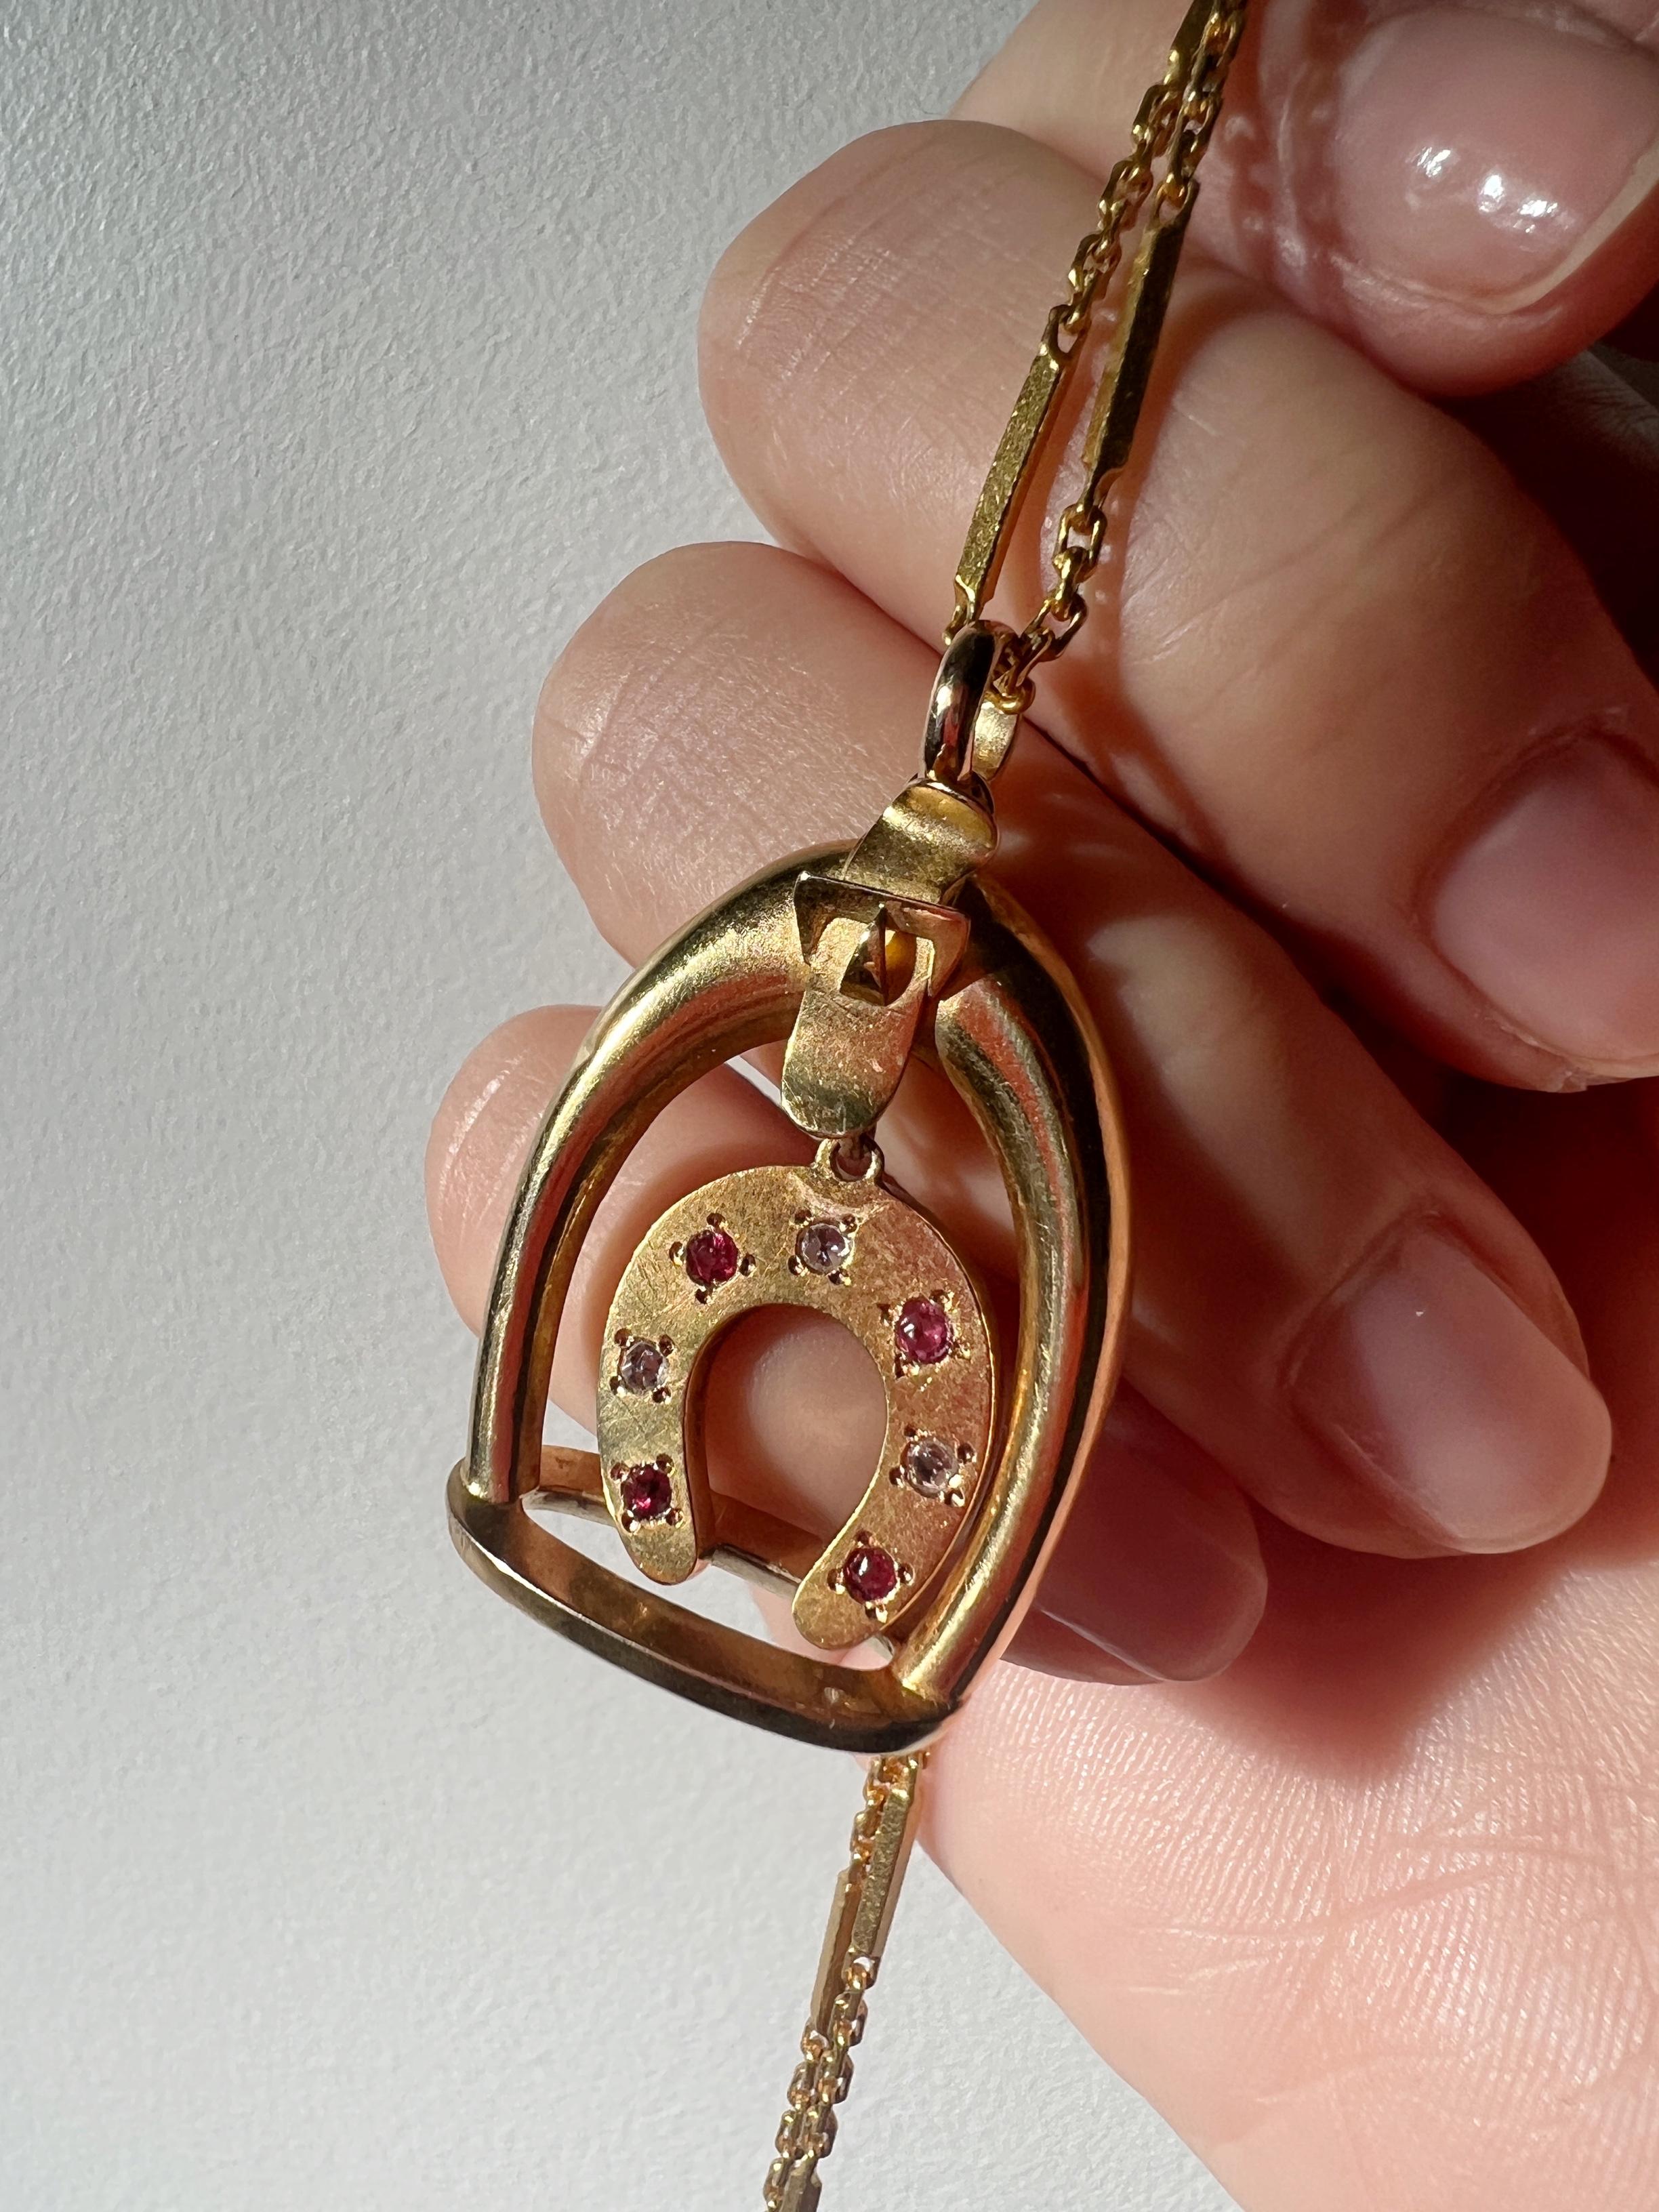 For sale a beautiful 18K gold pendant featuring a swinging horse shoe inside of a horse stirrup. On the horse shoe, there are 3 diamonds in rose cut style and 4 rubies in vivid pinkish red color.

The horse shoe / boot is considered as a symbol of